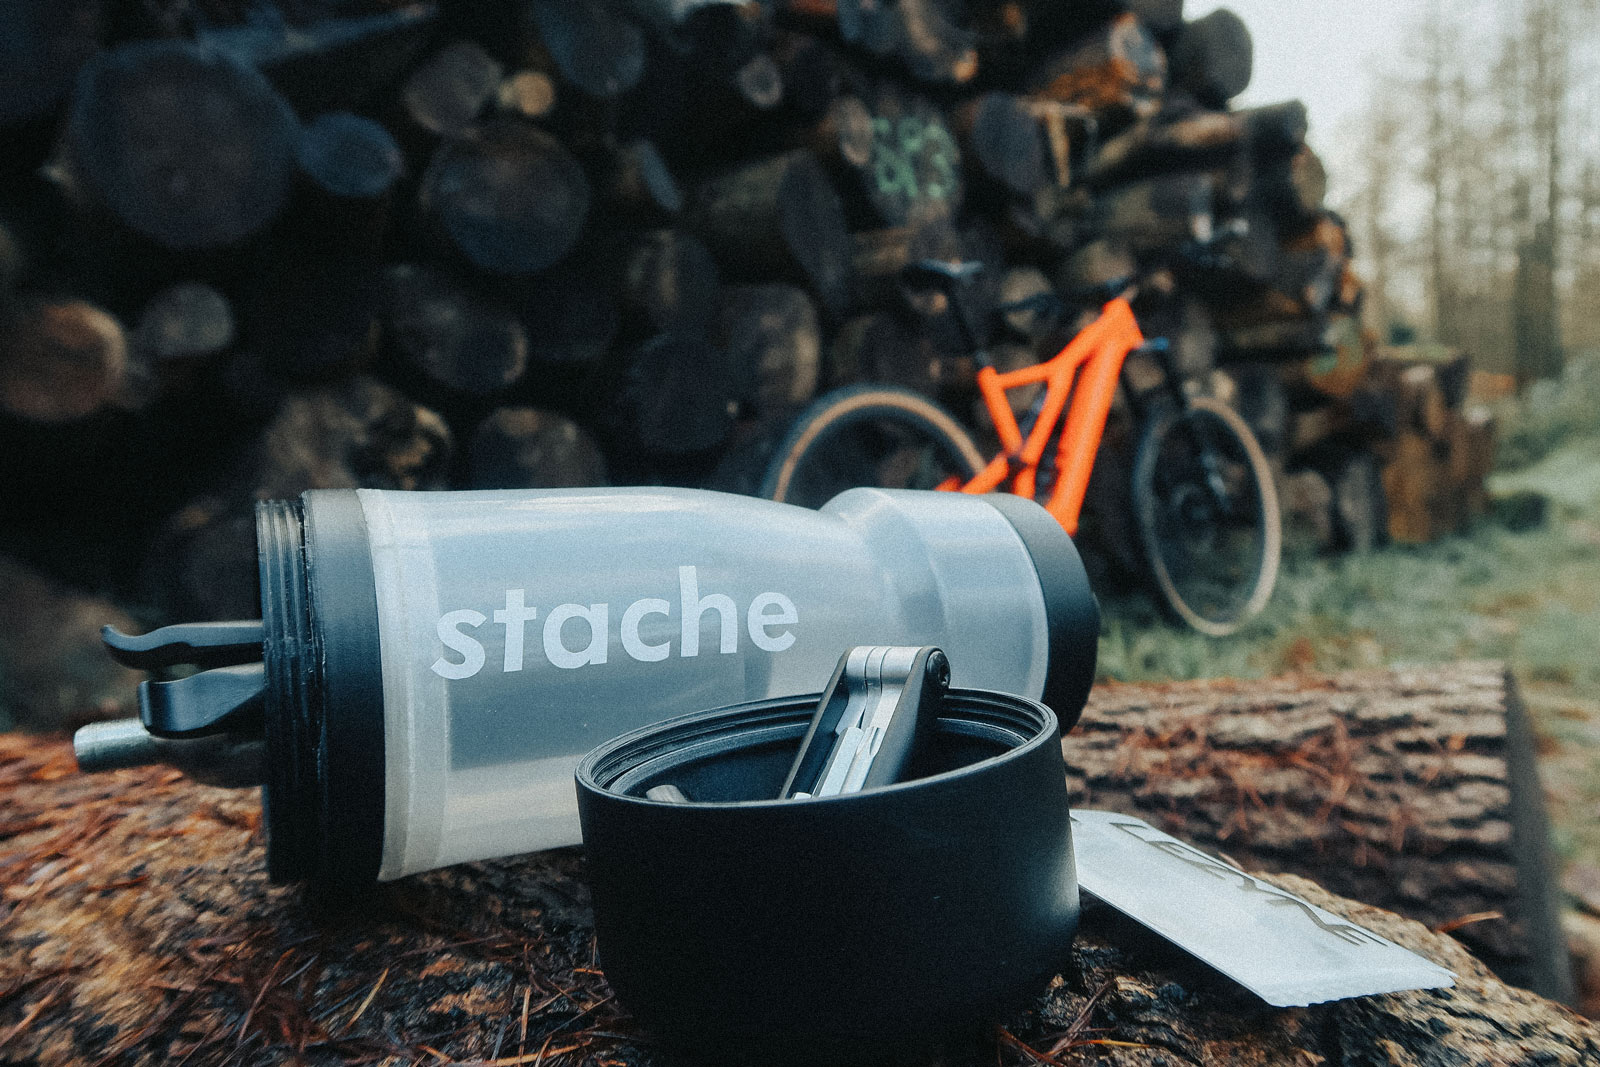 stache water bottle stores fluid co2 multitool tools spares snacks